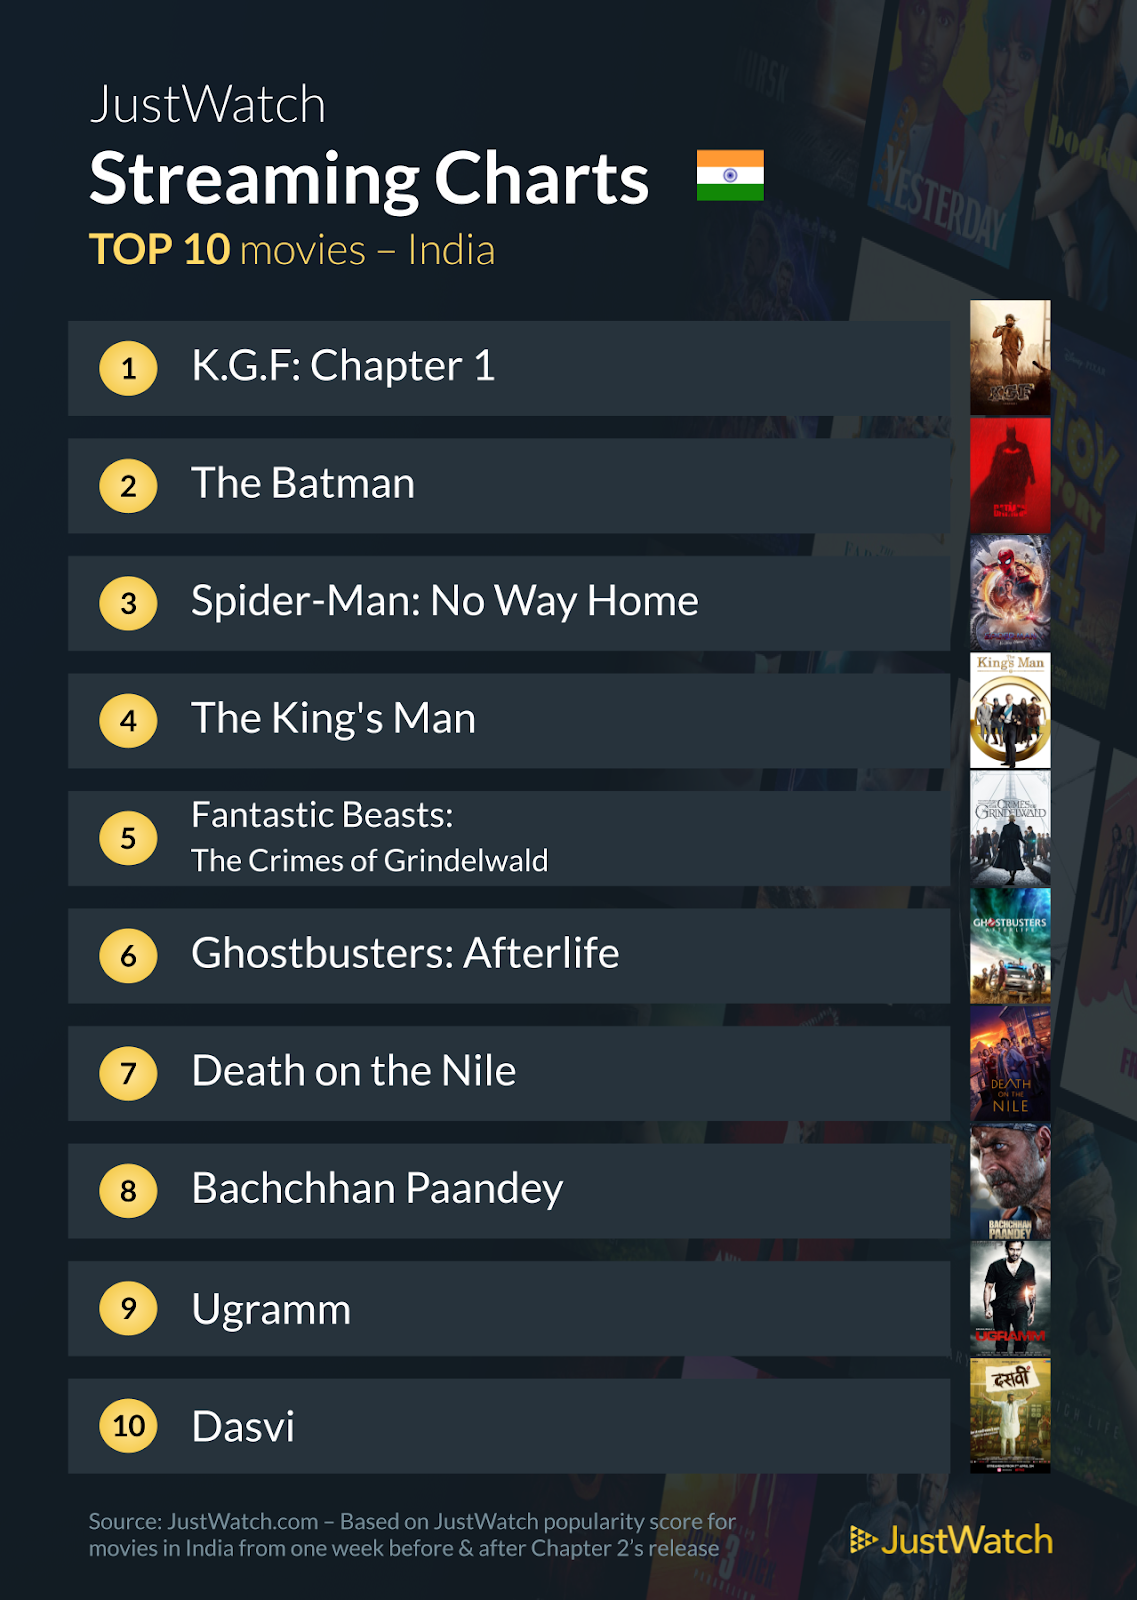 KGF Chapter 1 is the Most Streamed Movie in India in the Past Two Weeks